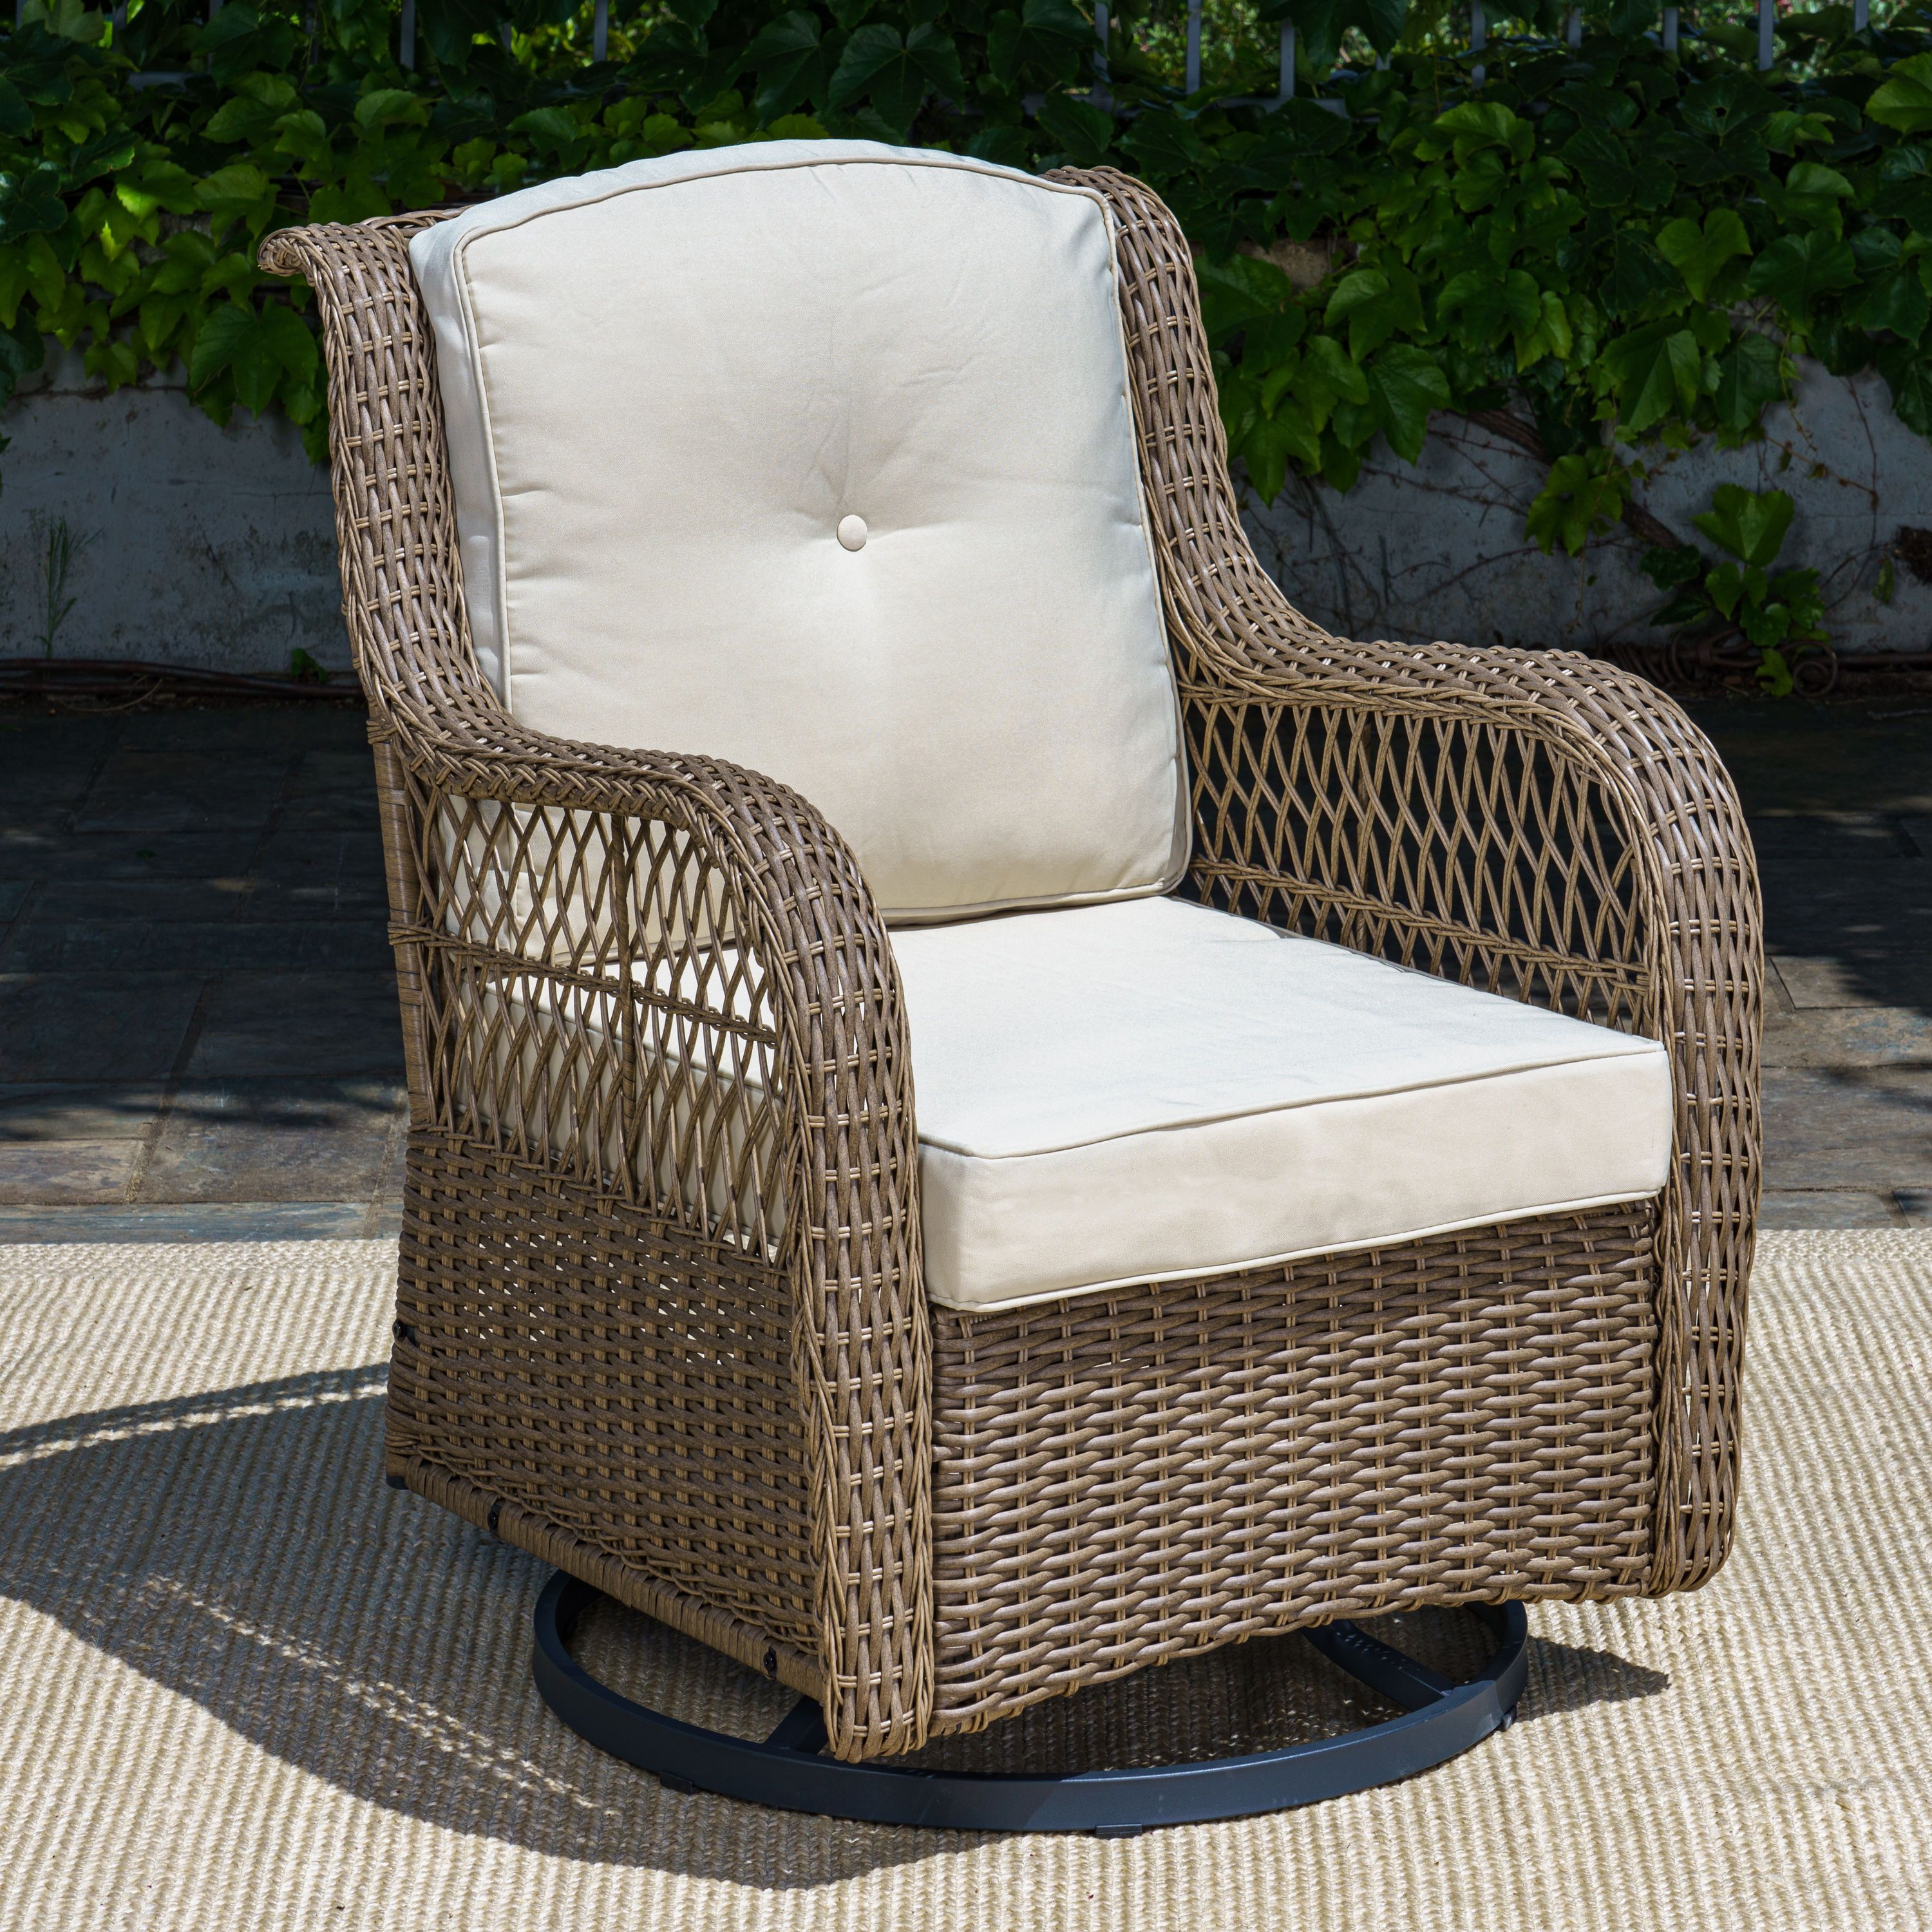 Tortuga Outdoor Rio Vista Wicker Sandstone Steel Frame Swivel Glider  Conversation Chair(s) With Tan Cushioned Seat In The Patio Chairs  Department At Lowes In 2 Piece Swivel Gliders With Patio Cover (View 13 of 15)